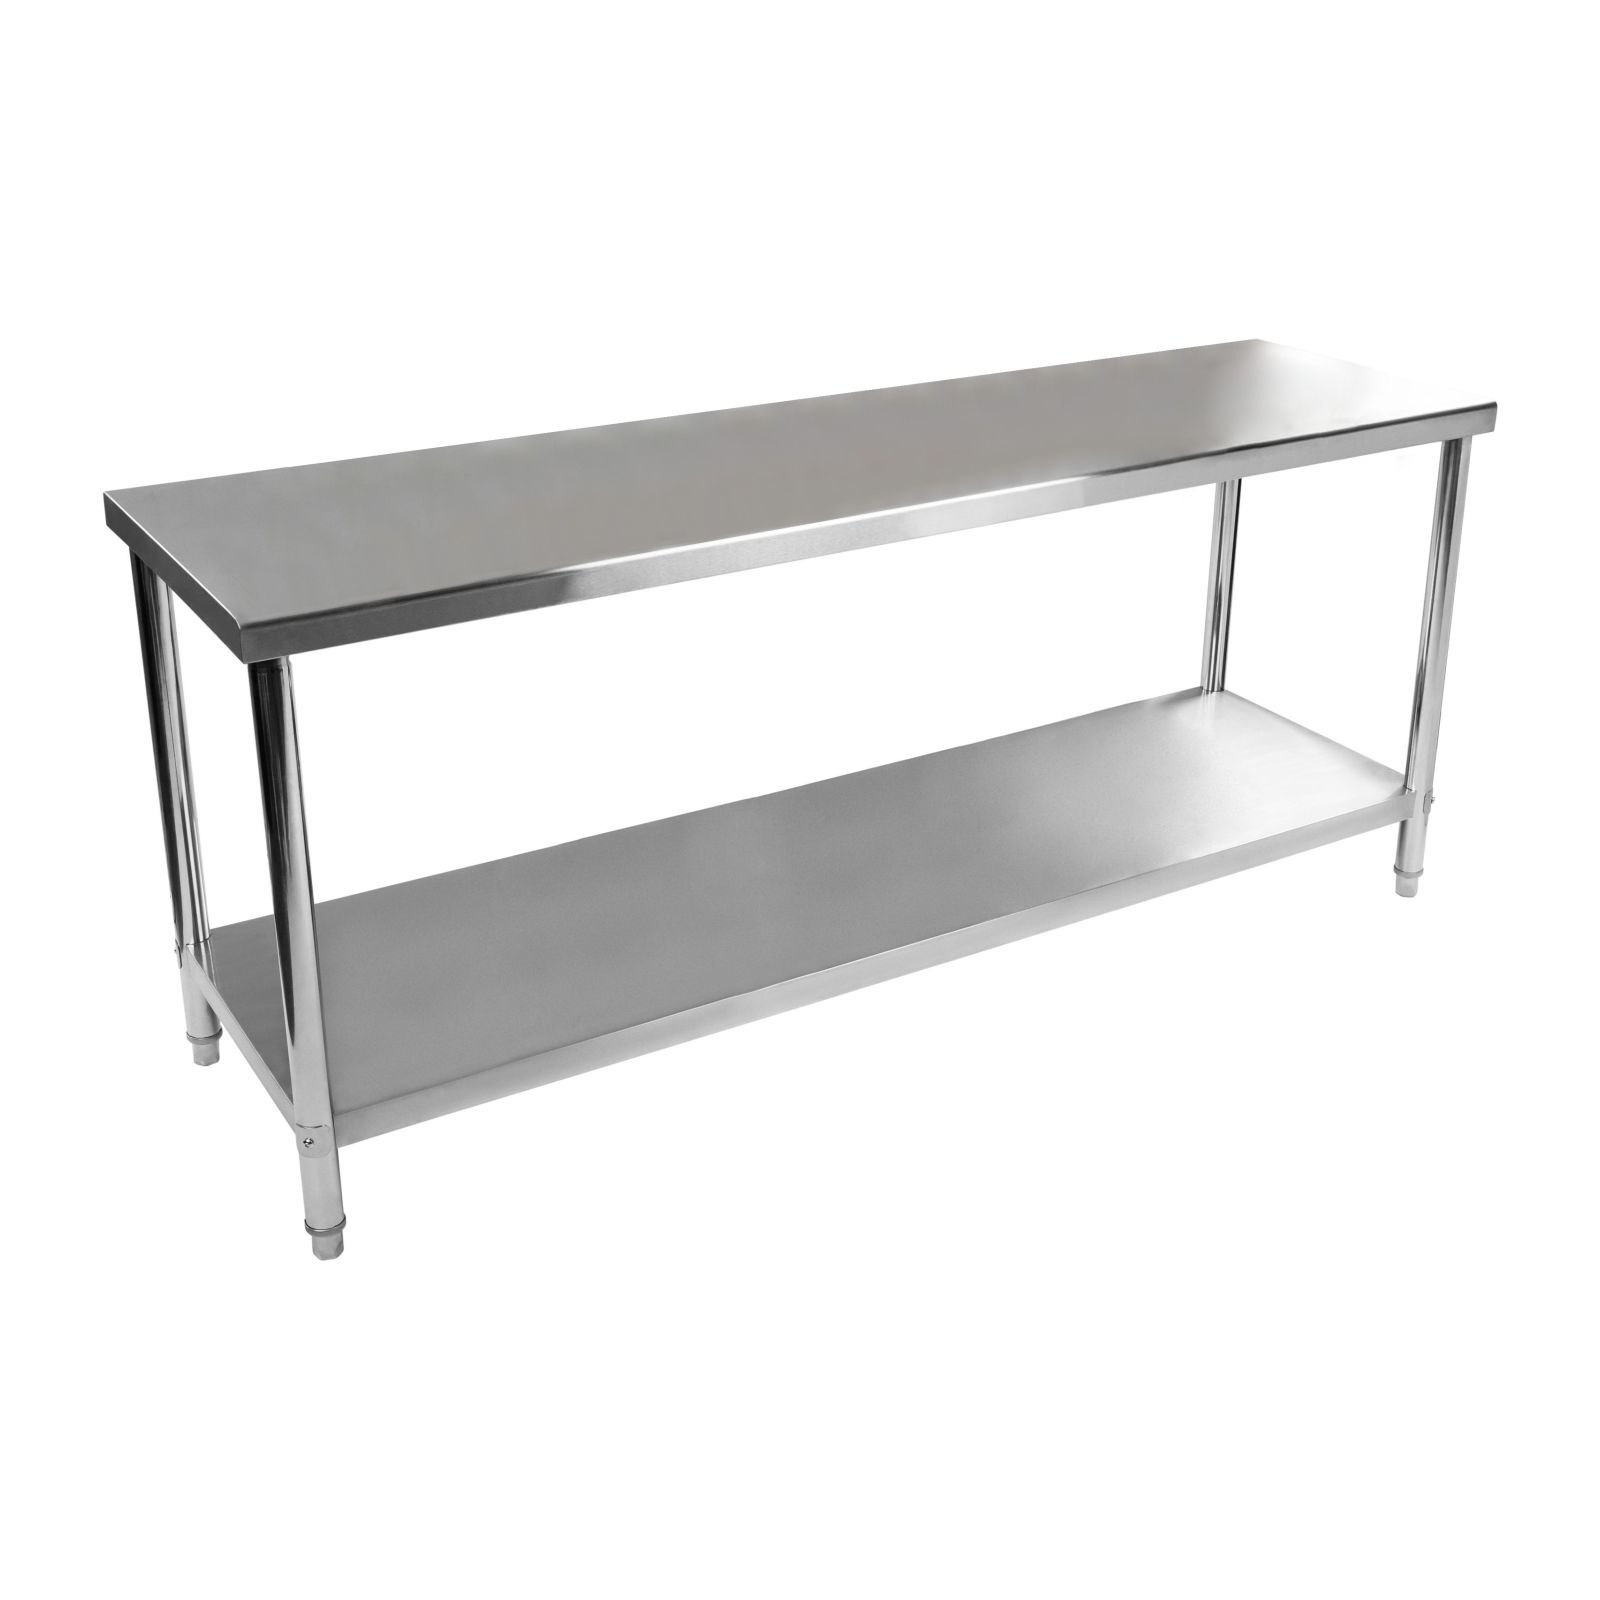 Royal Catering Stainless Steel Work Table - 200 x 60 cm